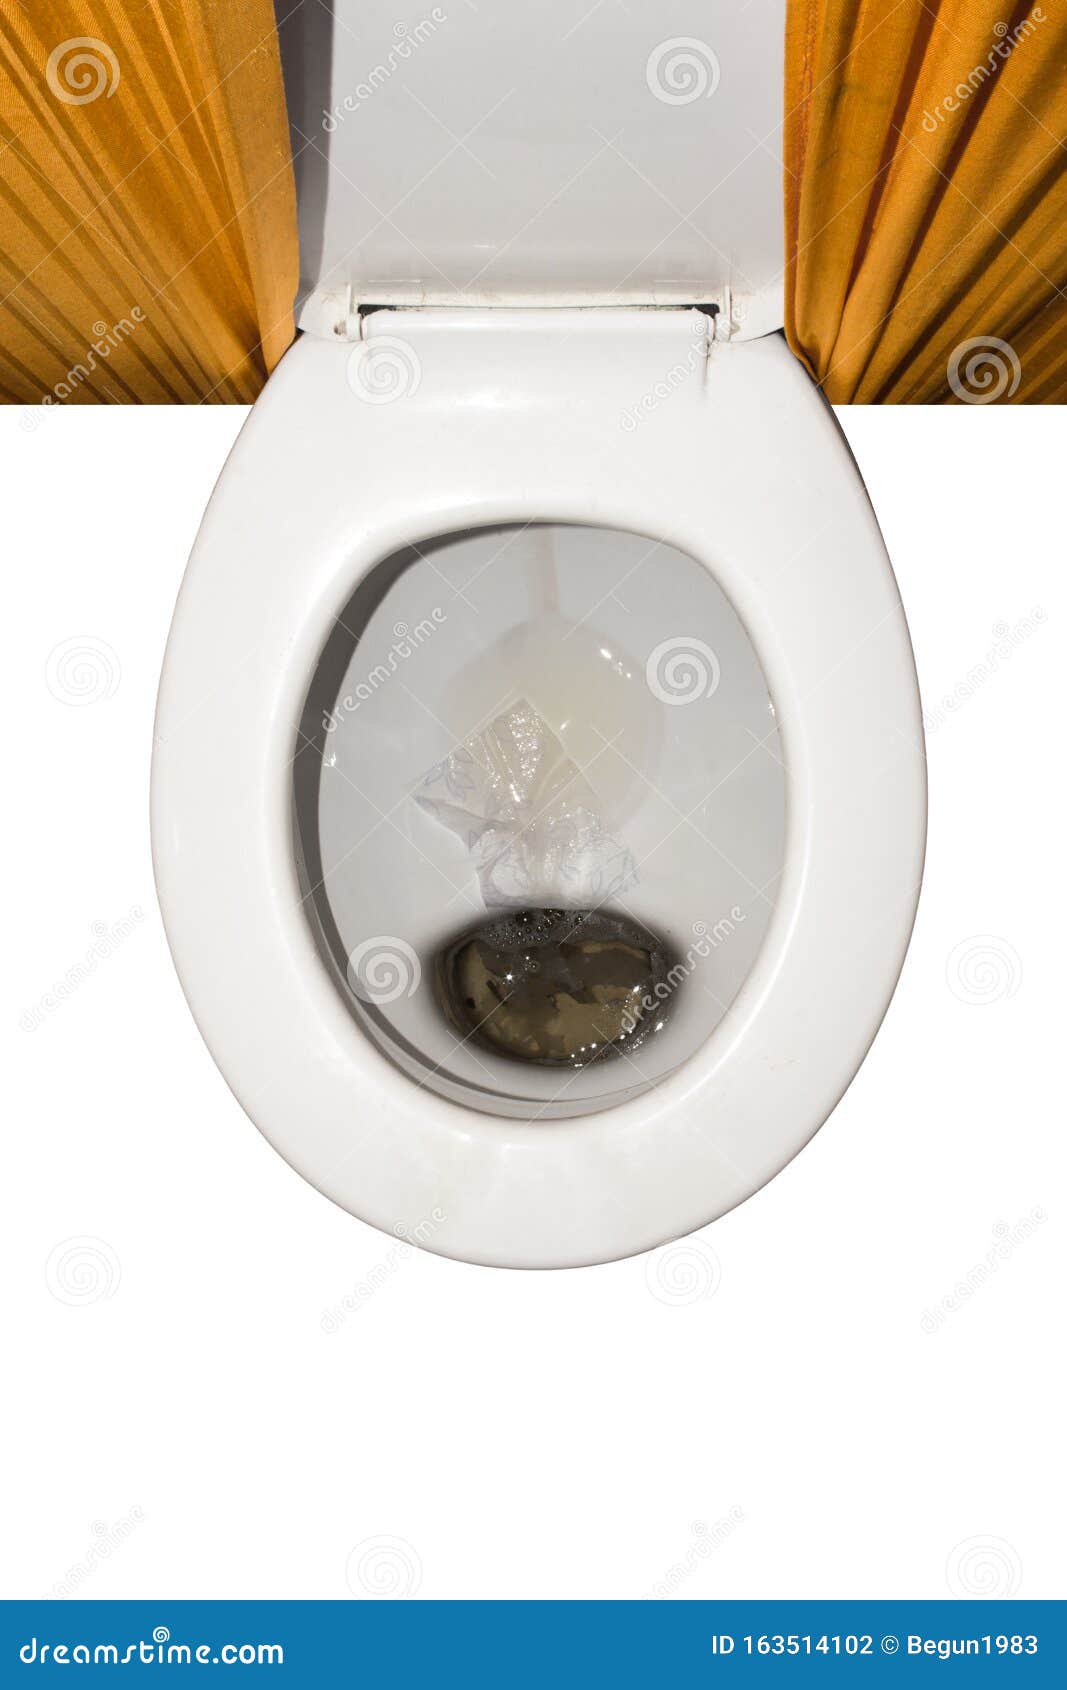 Old Untidy Toilet.Dirty Old Toilet. Stock Photo - Image of latrine ...